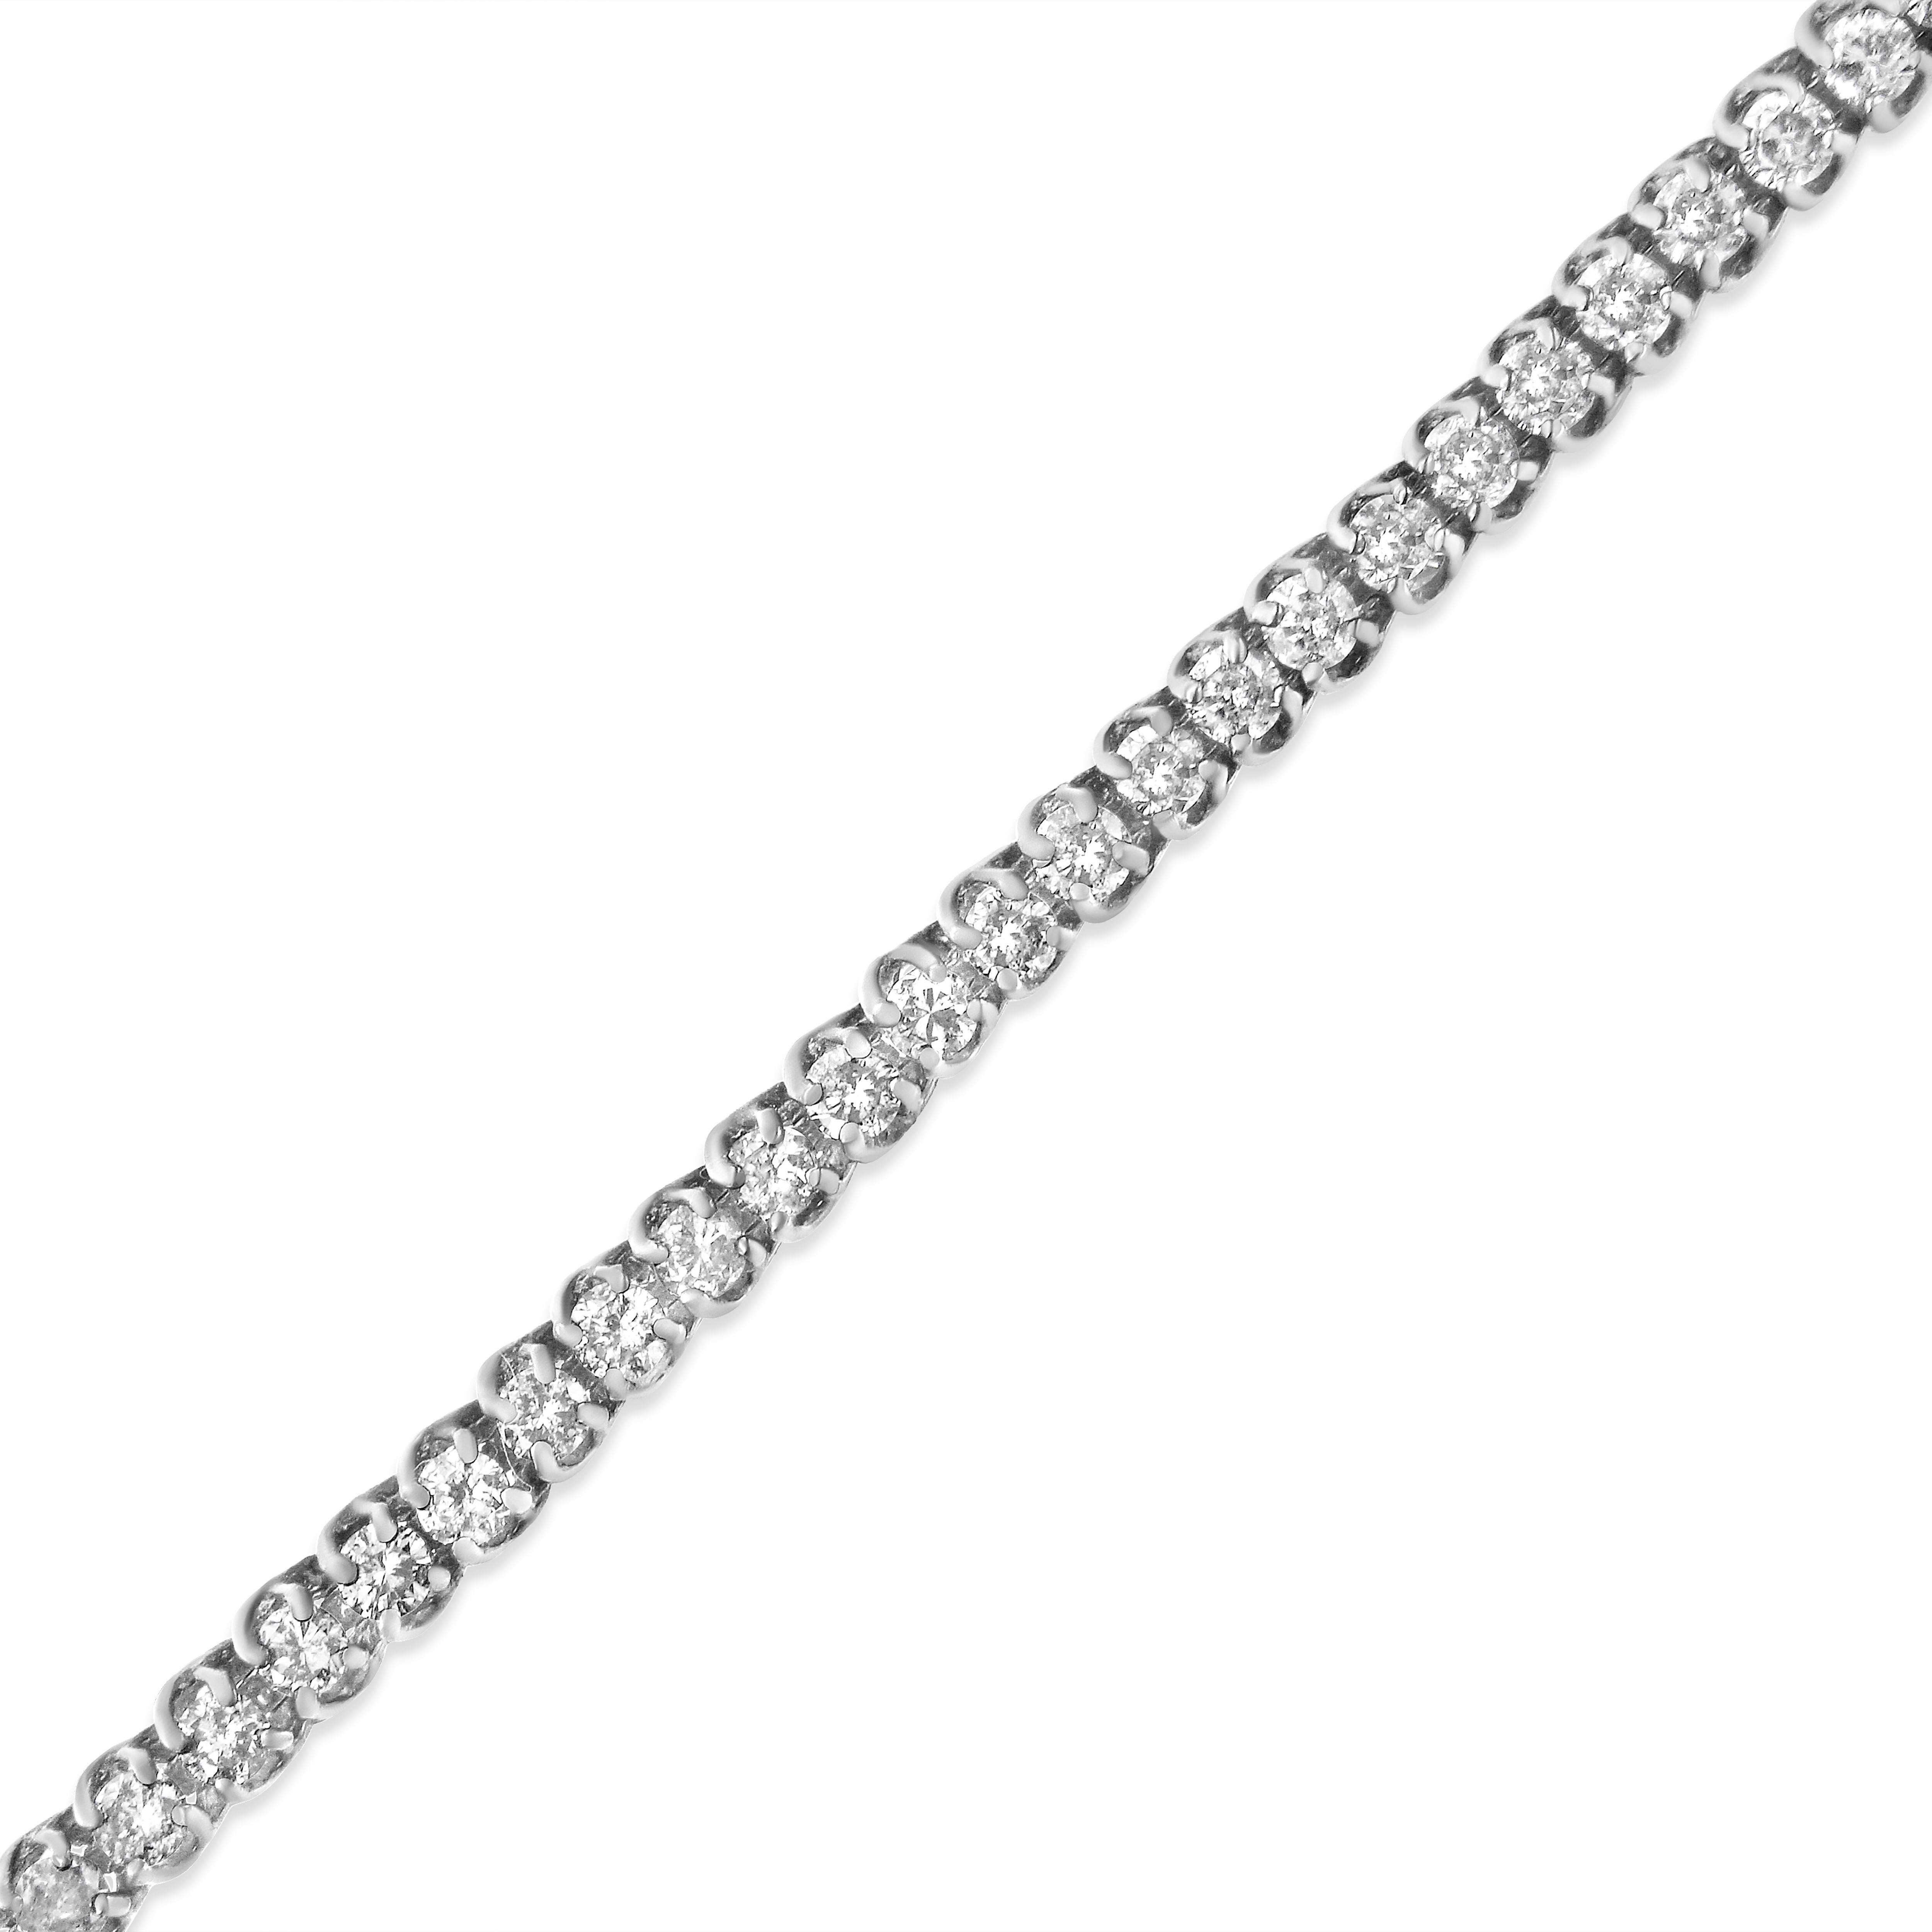 Elegant and timeless, you can't go wrong with this everlasting tennis bracelet. Round-cut diamonds sparkle in silver links in this 4 carat piece. The 7